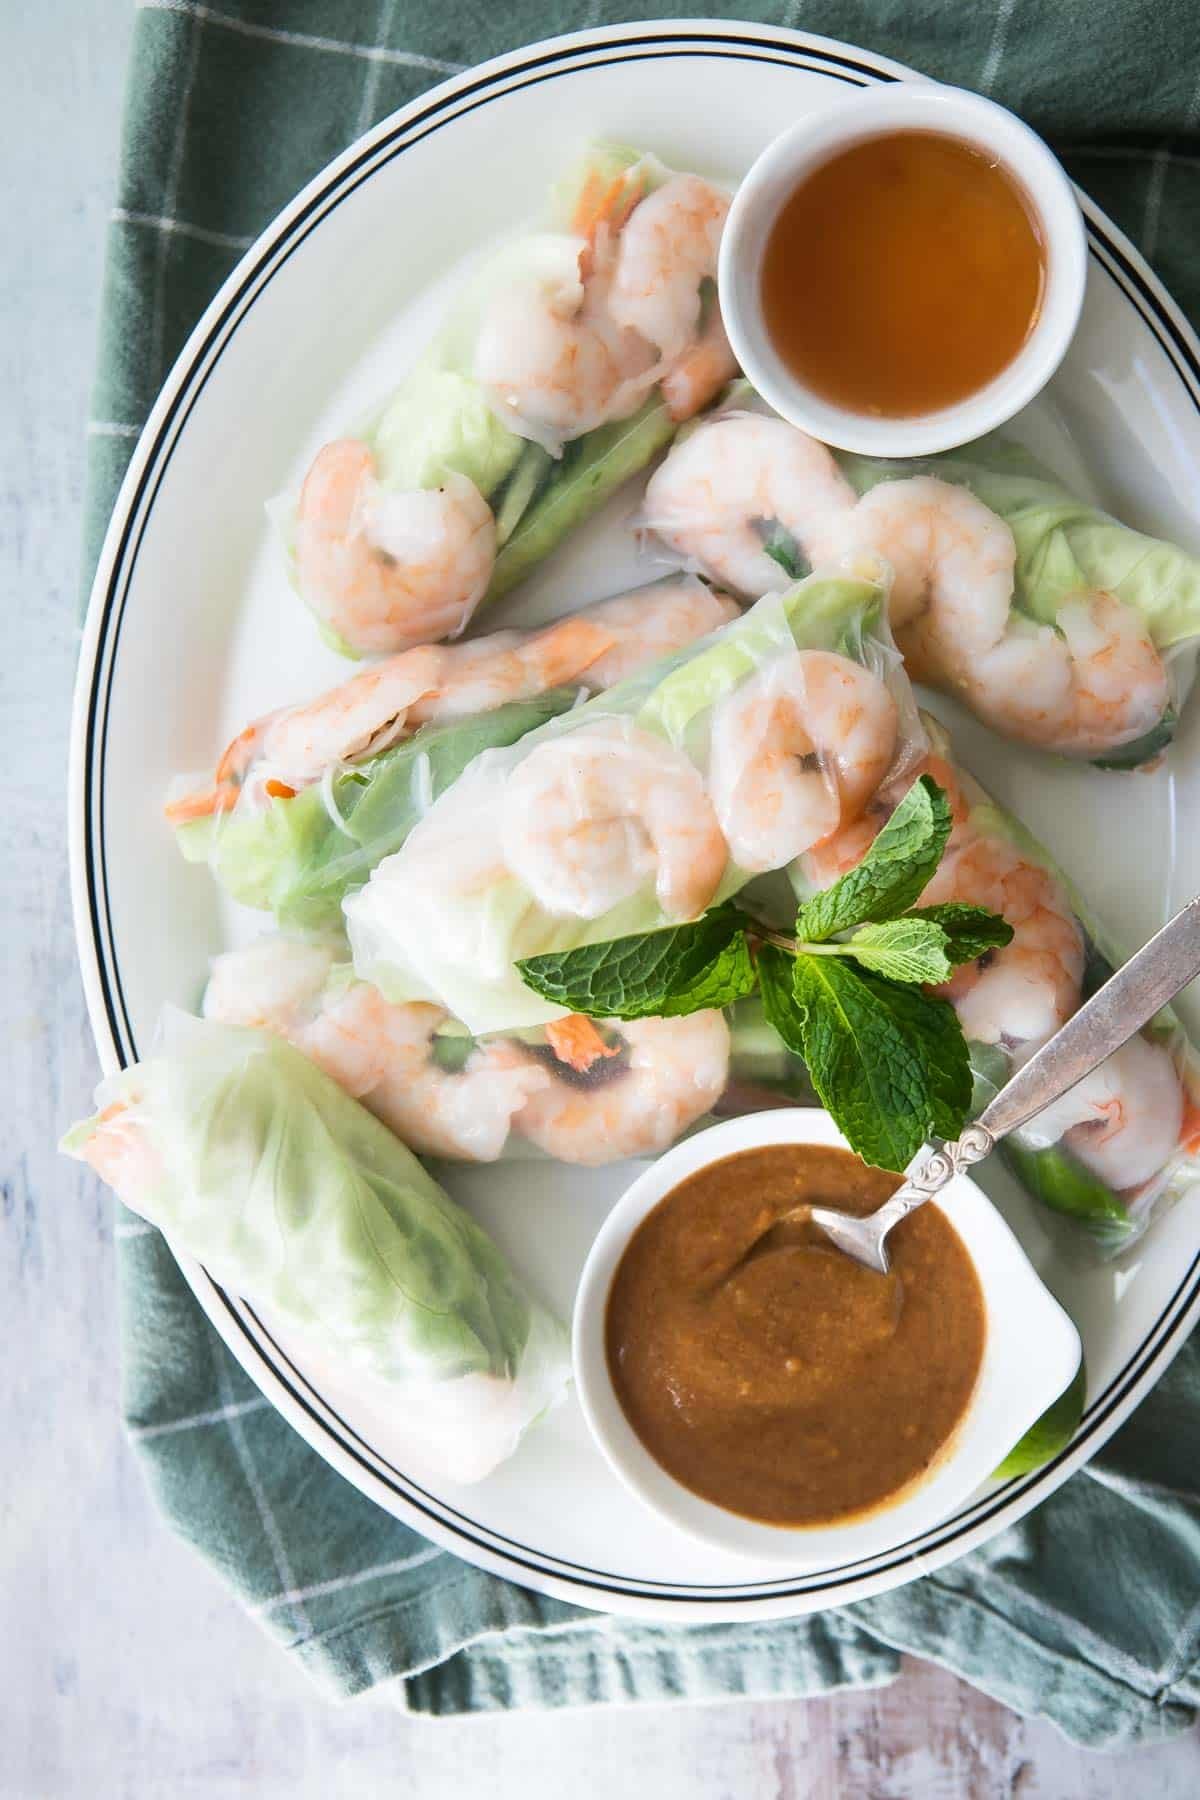 A platter of Vietnamese shrimp rolls with dipping sauces.